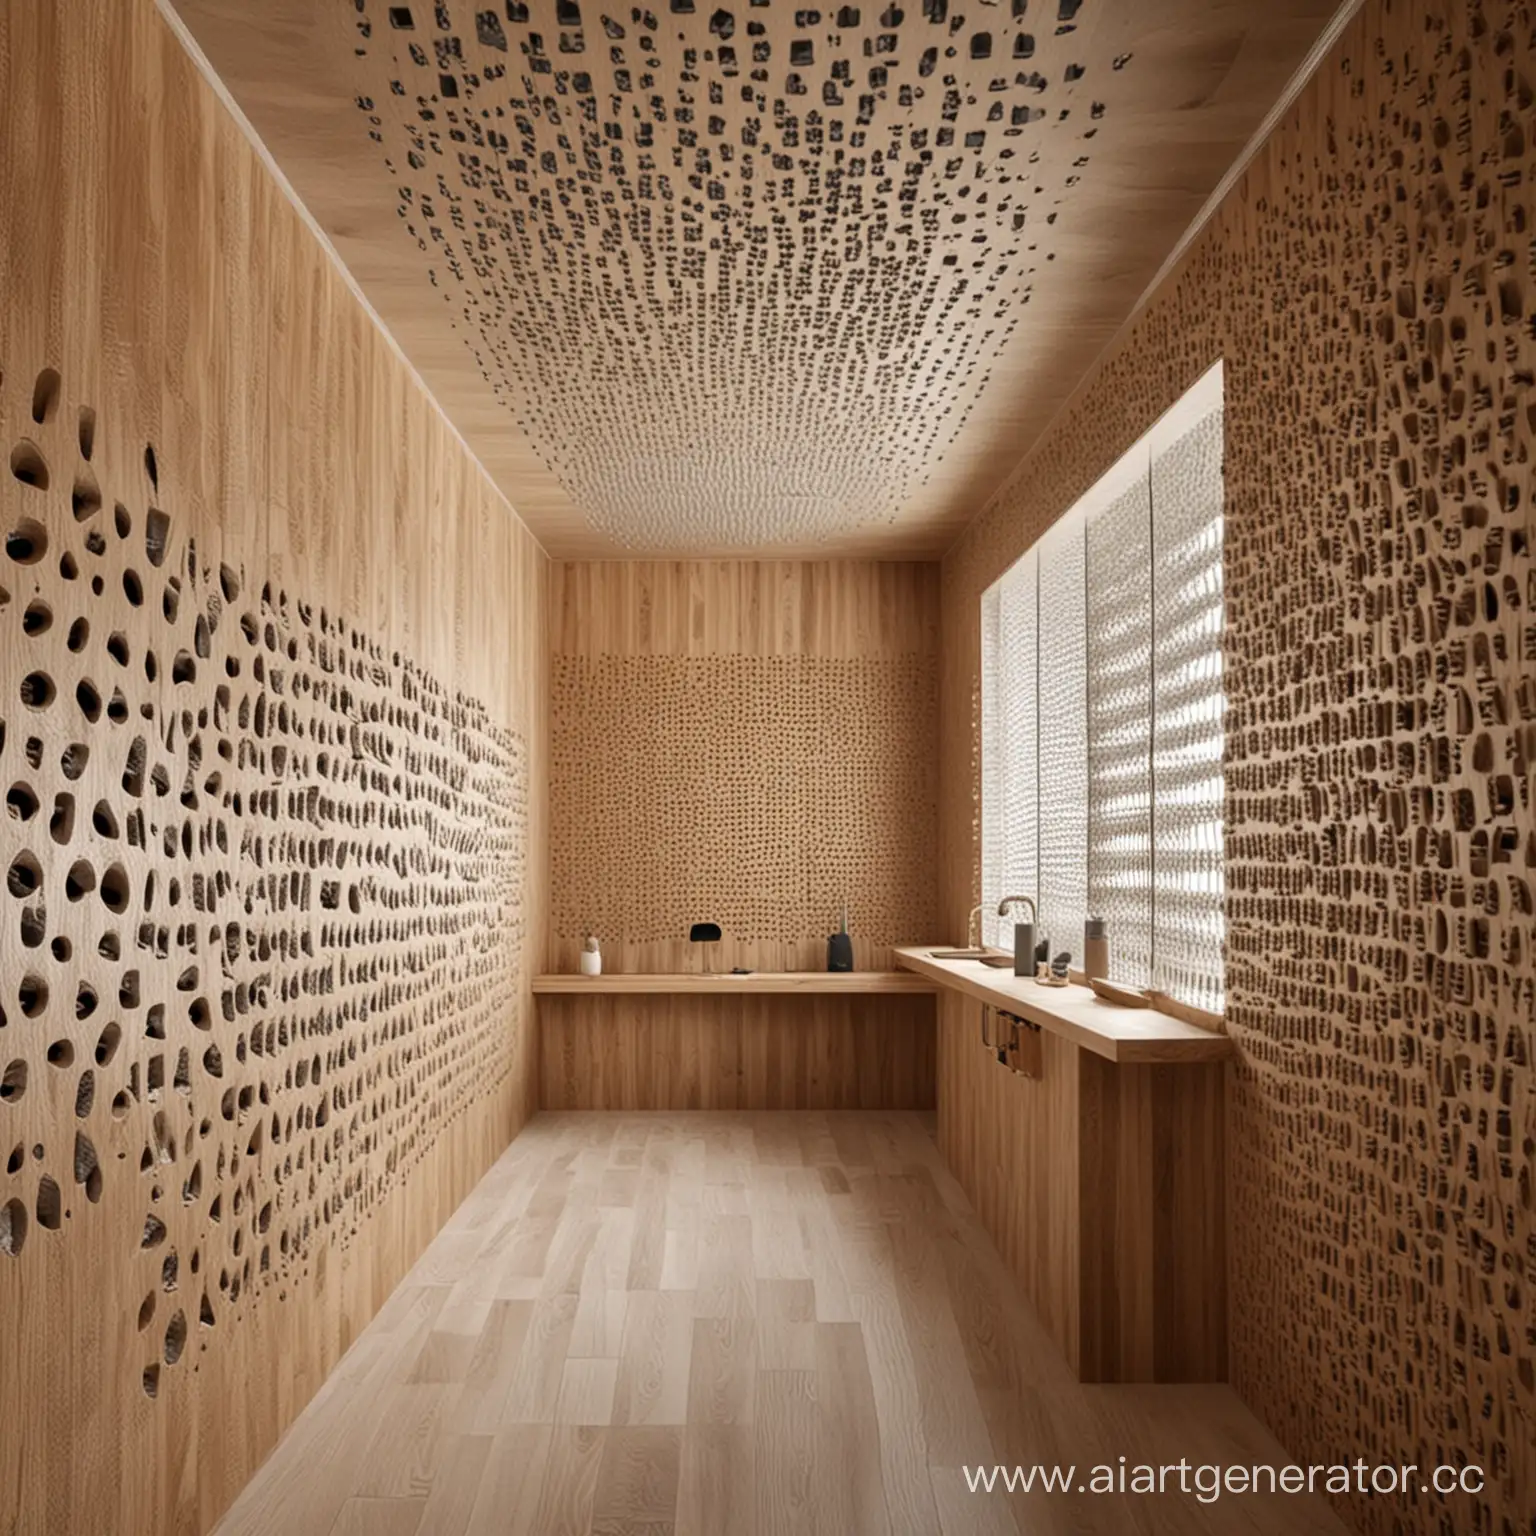 Teeththemed-Room-with-Gratertextured-Furniture-Harmonious-Contrast-of-Large-and-Small-Teeth